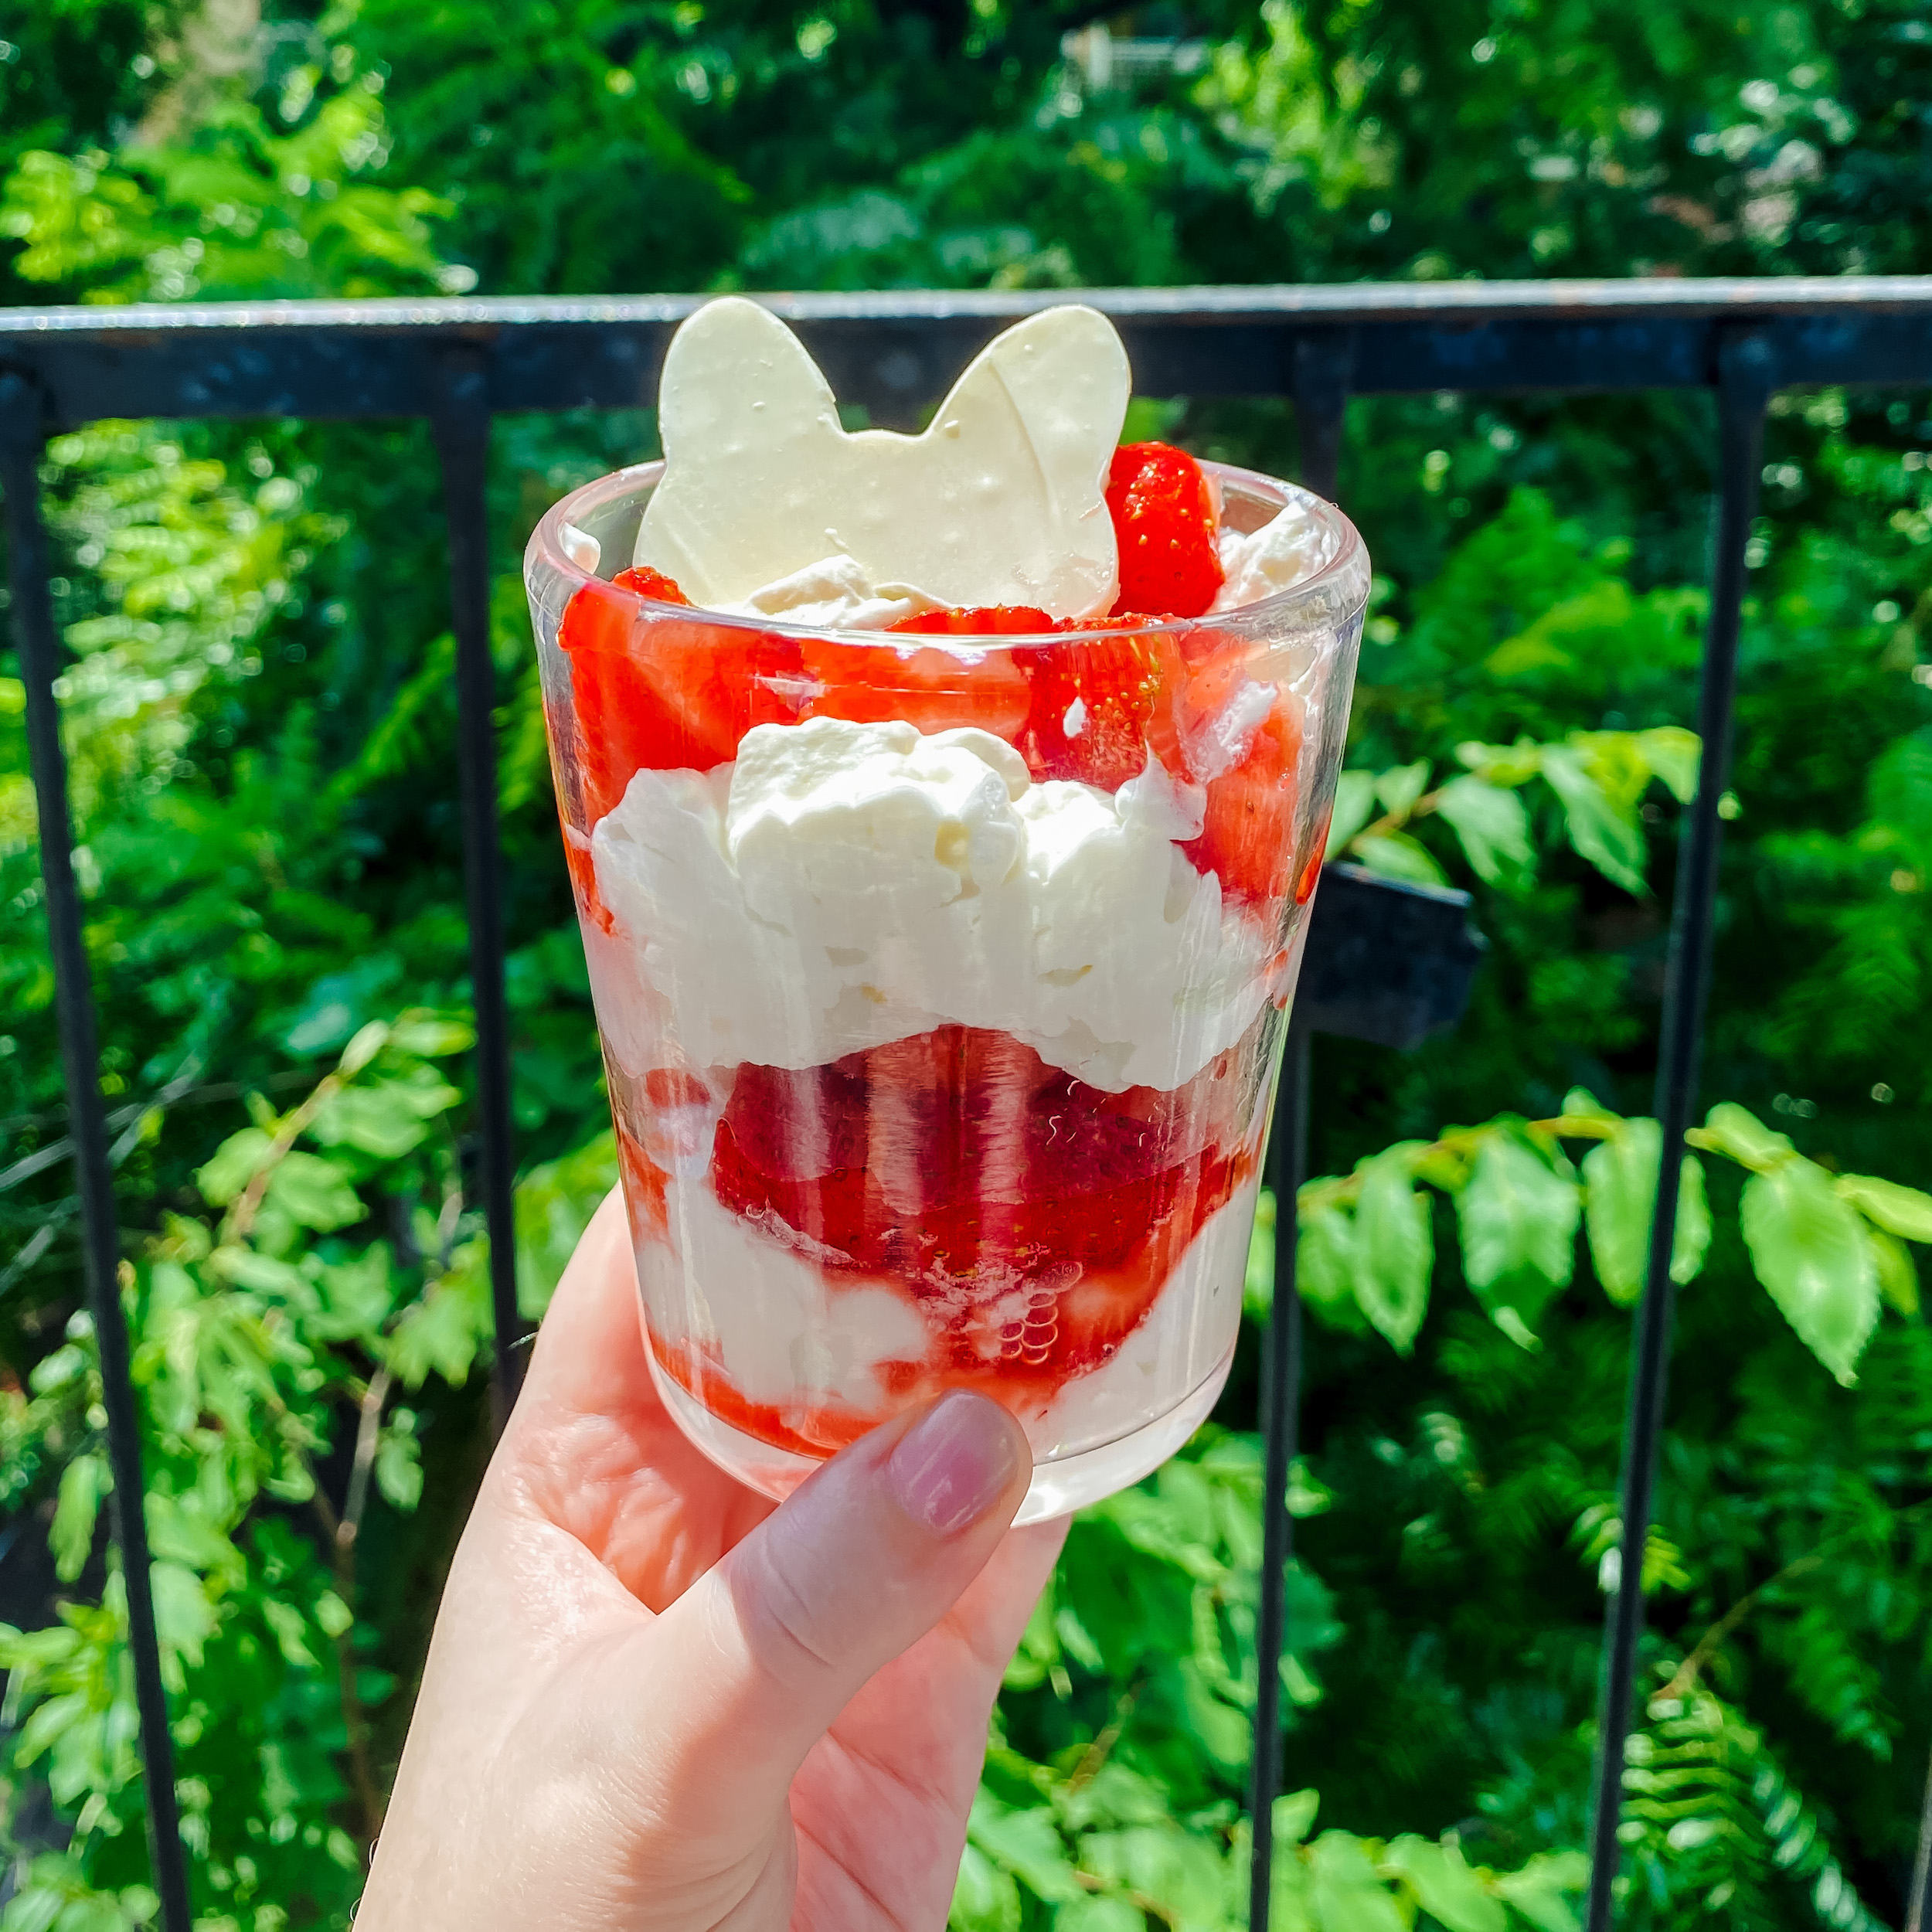 Minnie's Strawberries and Cream (a glass with layers of sliced strawberries, whipped cream, and meringue cookies, topped with a white chocolate bow)